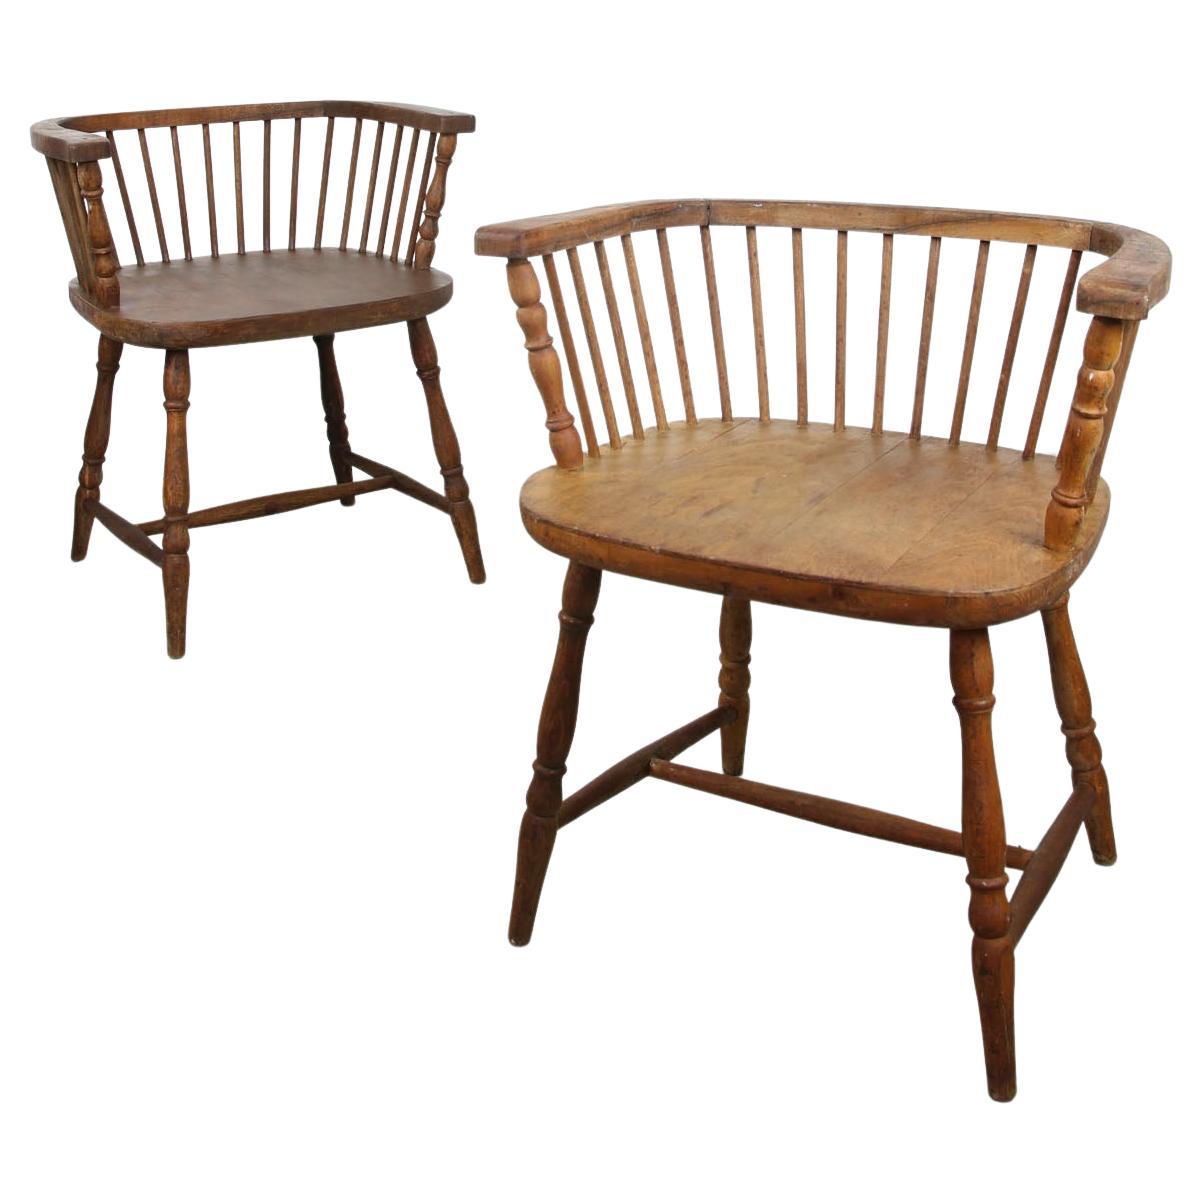 Set of English Antique Windsor Low Back Chairs